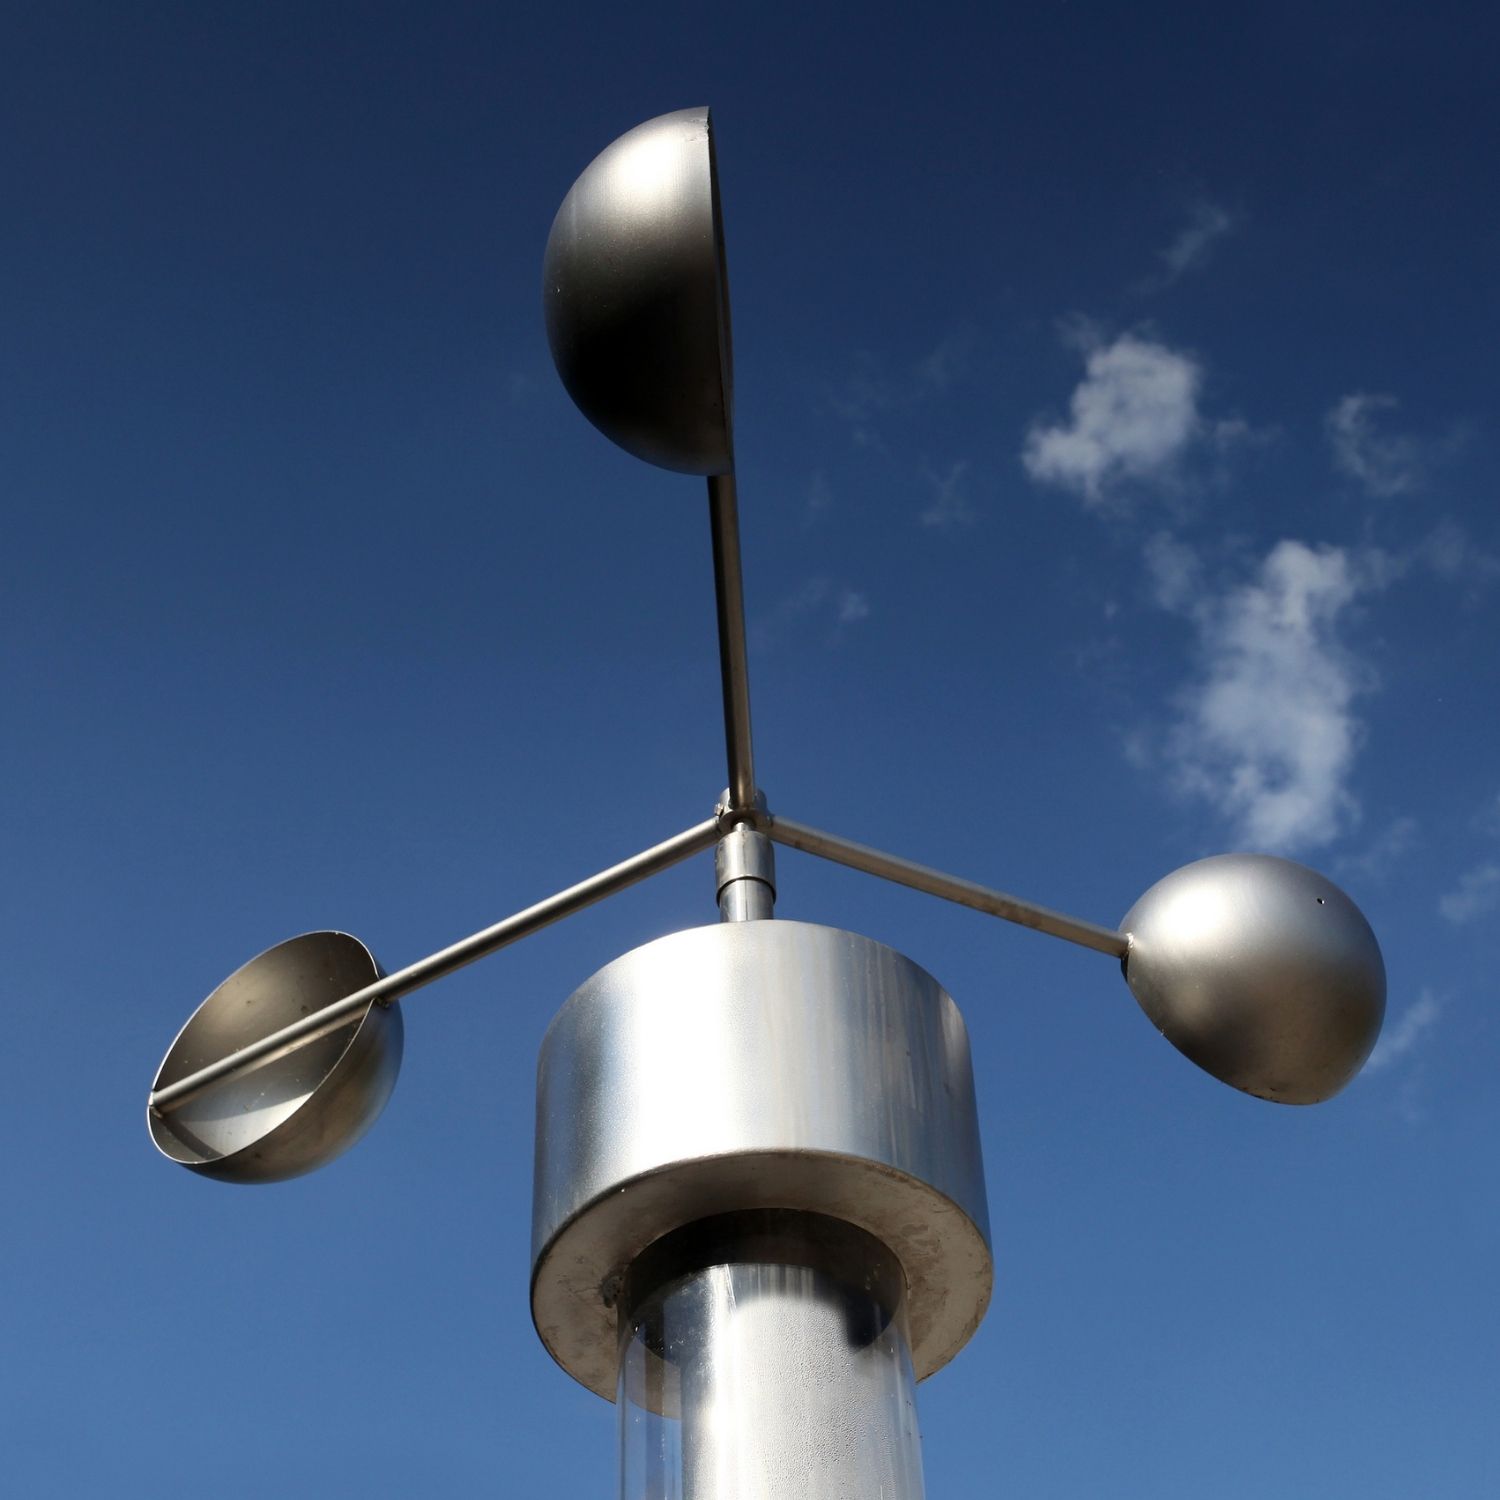 anemometer wind speed measuring device in blue sky with fluffy clouds